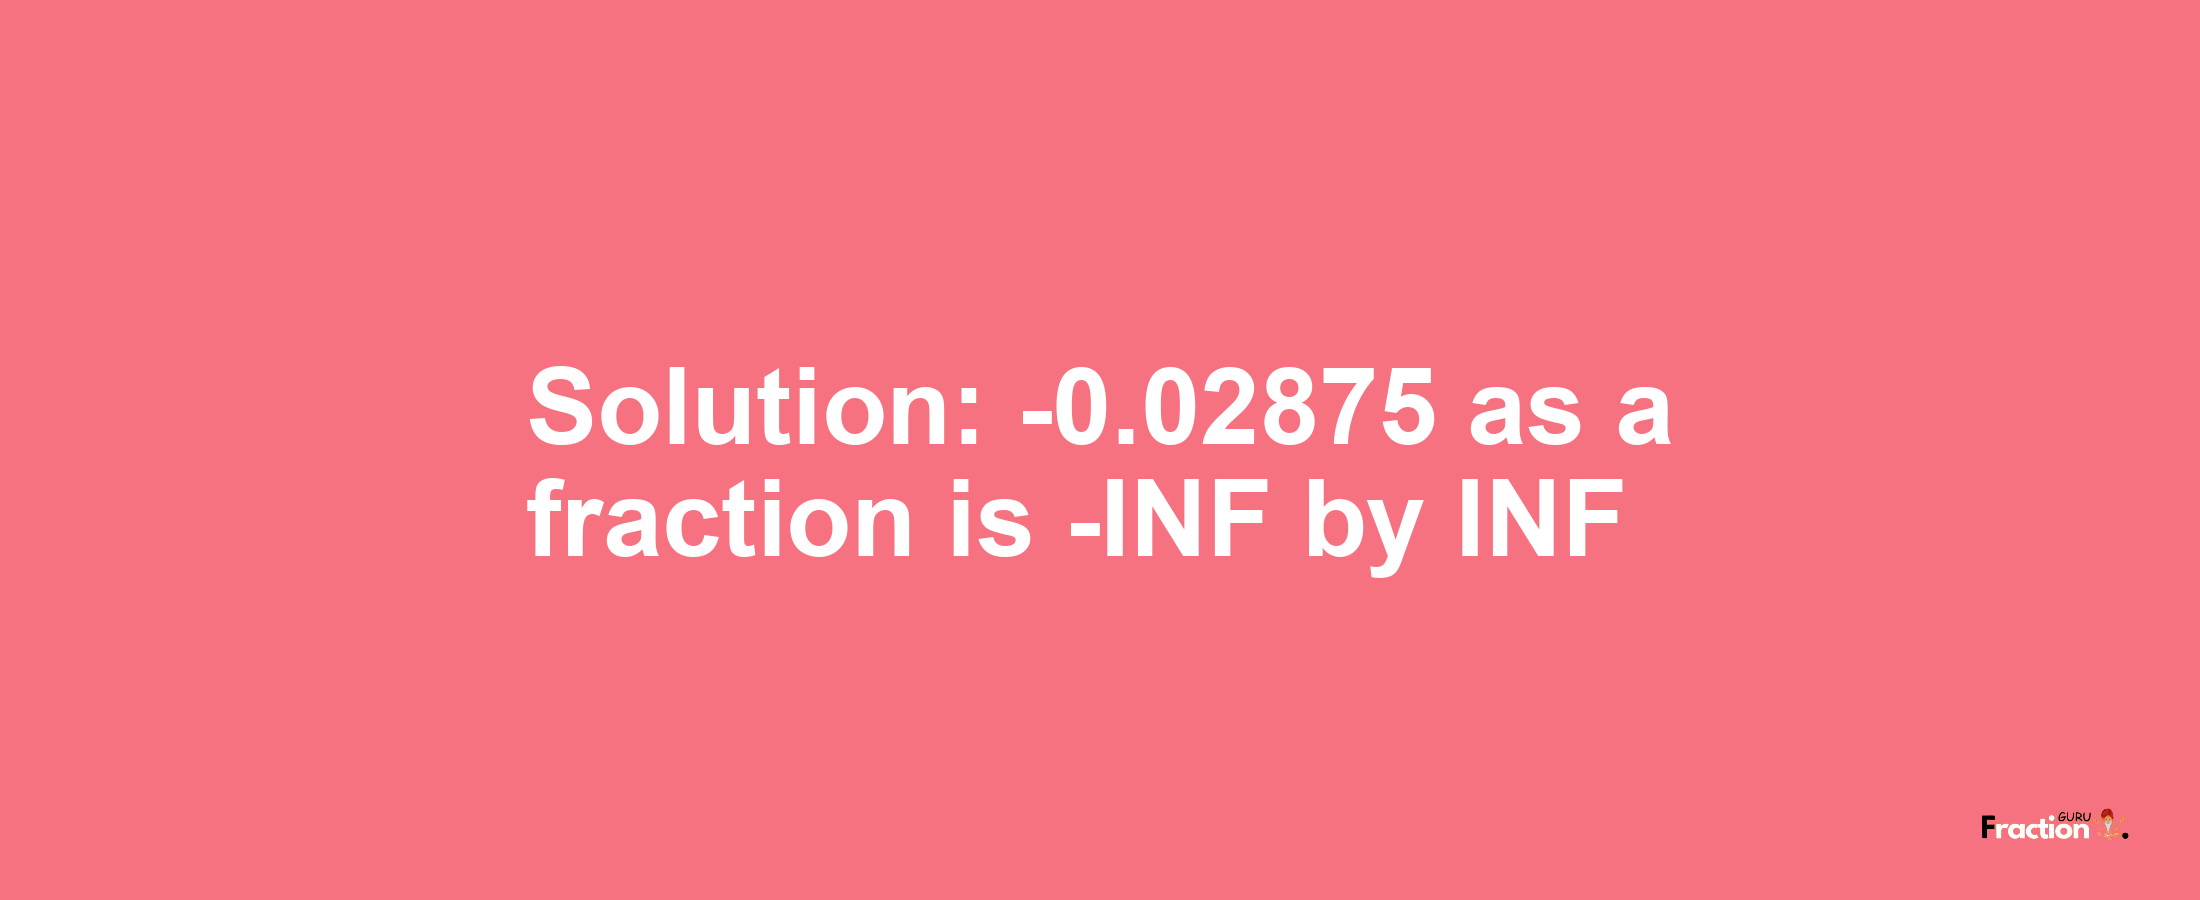 Solution:-0.02875 as a fraction is -INF/INF